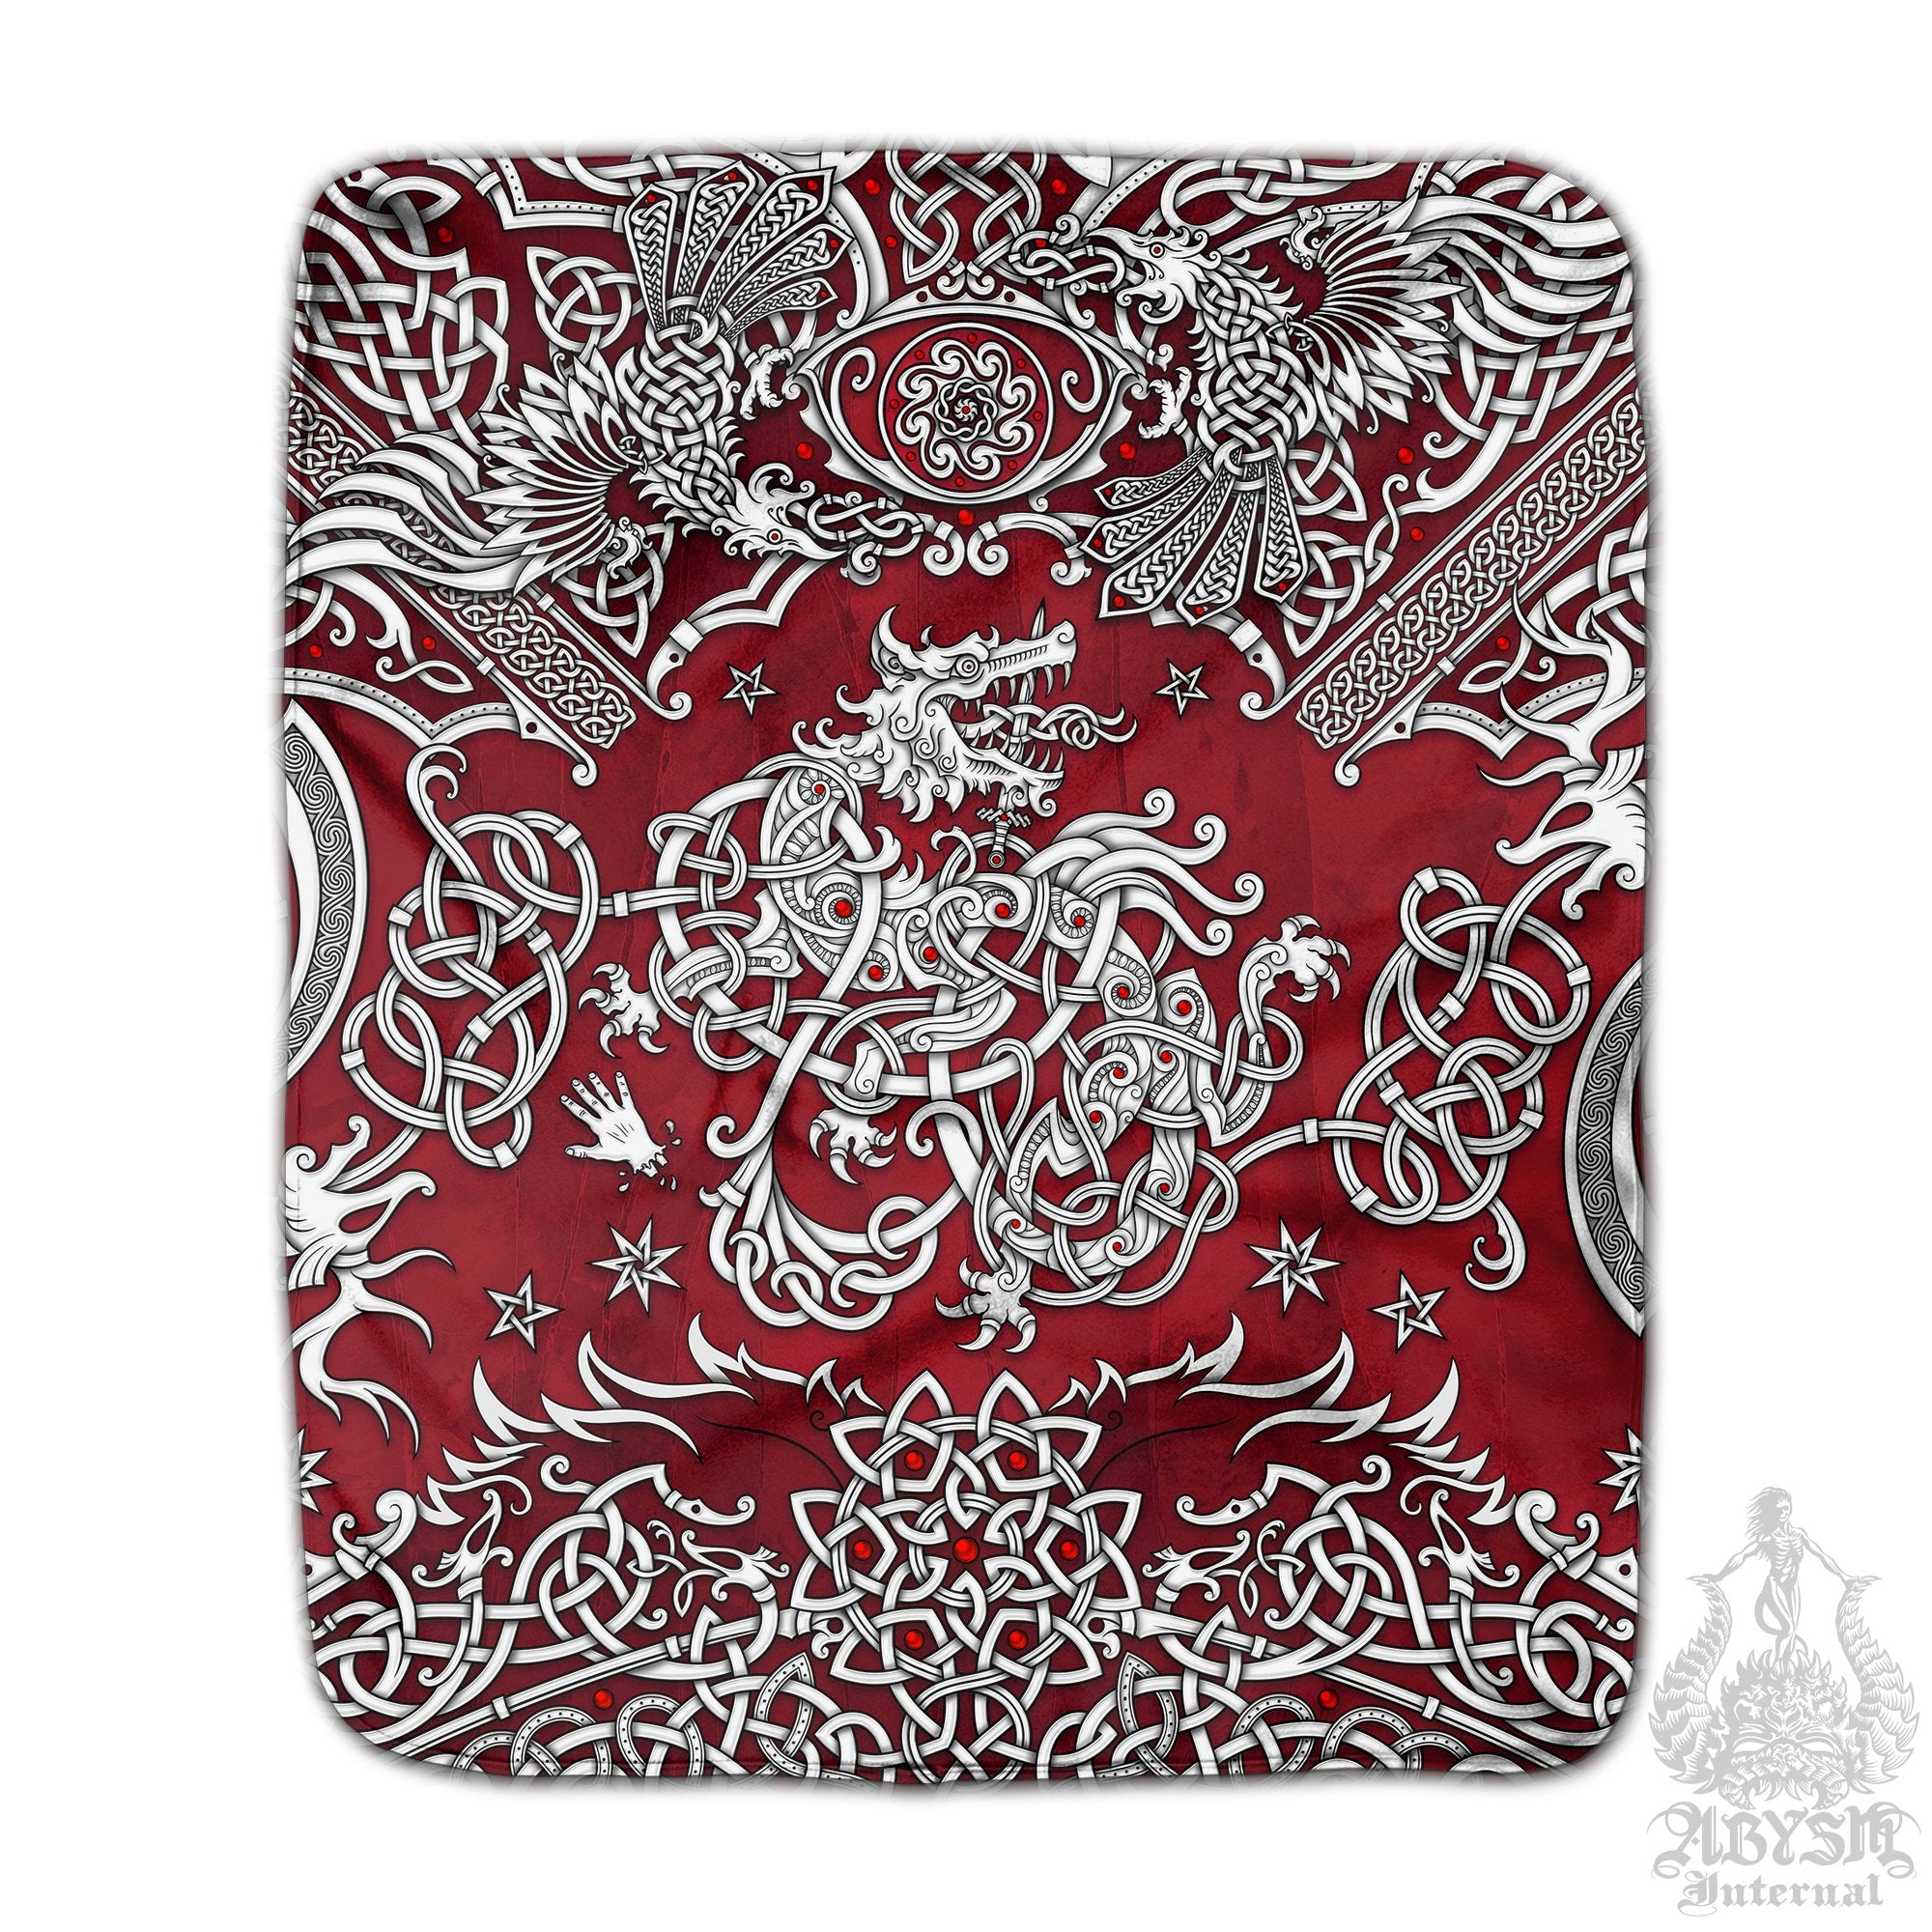 Intricate black and white throw Sherpa fleece blanket with the mythological wolf Fenrir made in Viking style art. - Abysm Internal